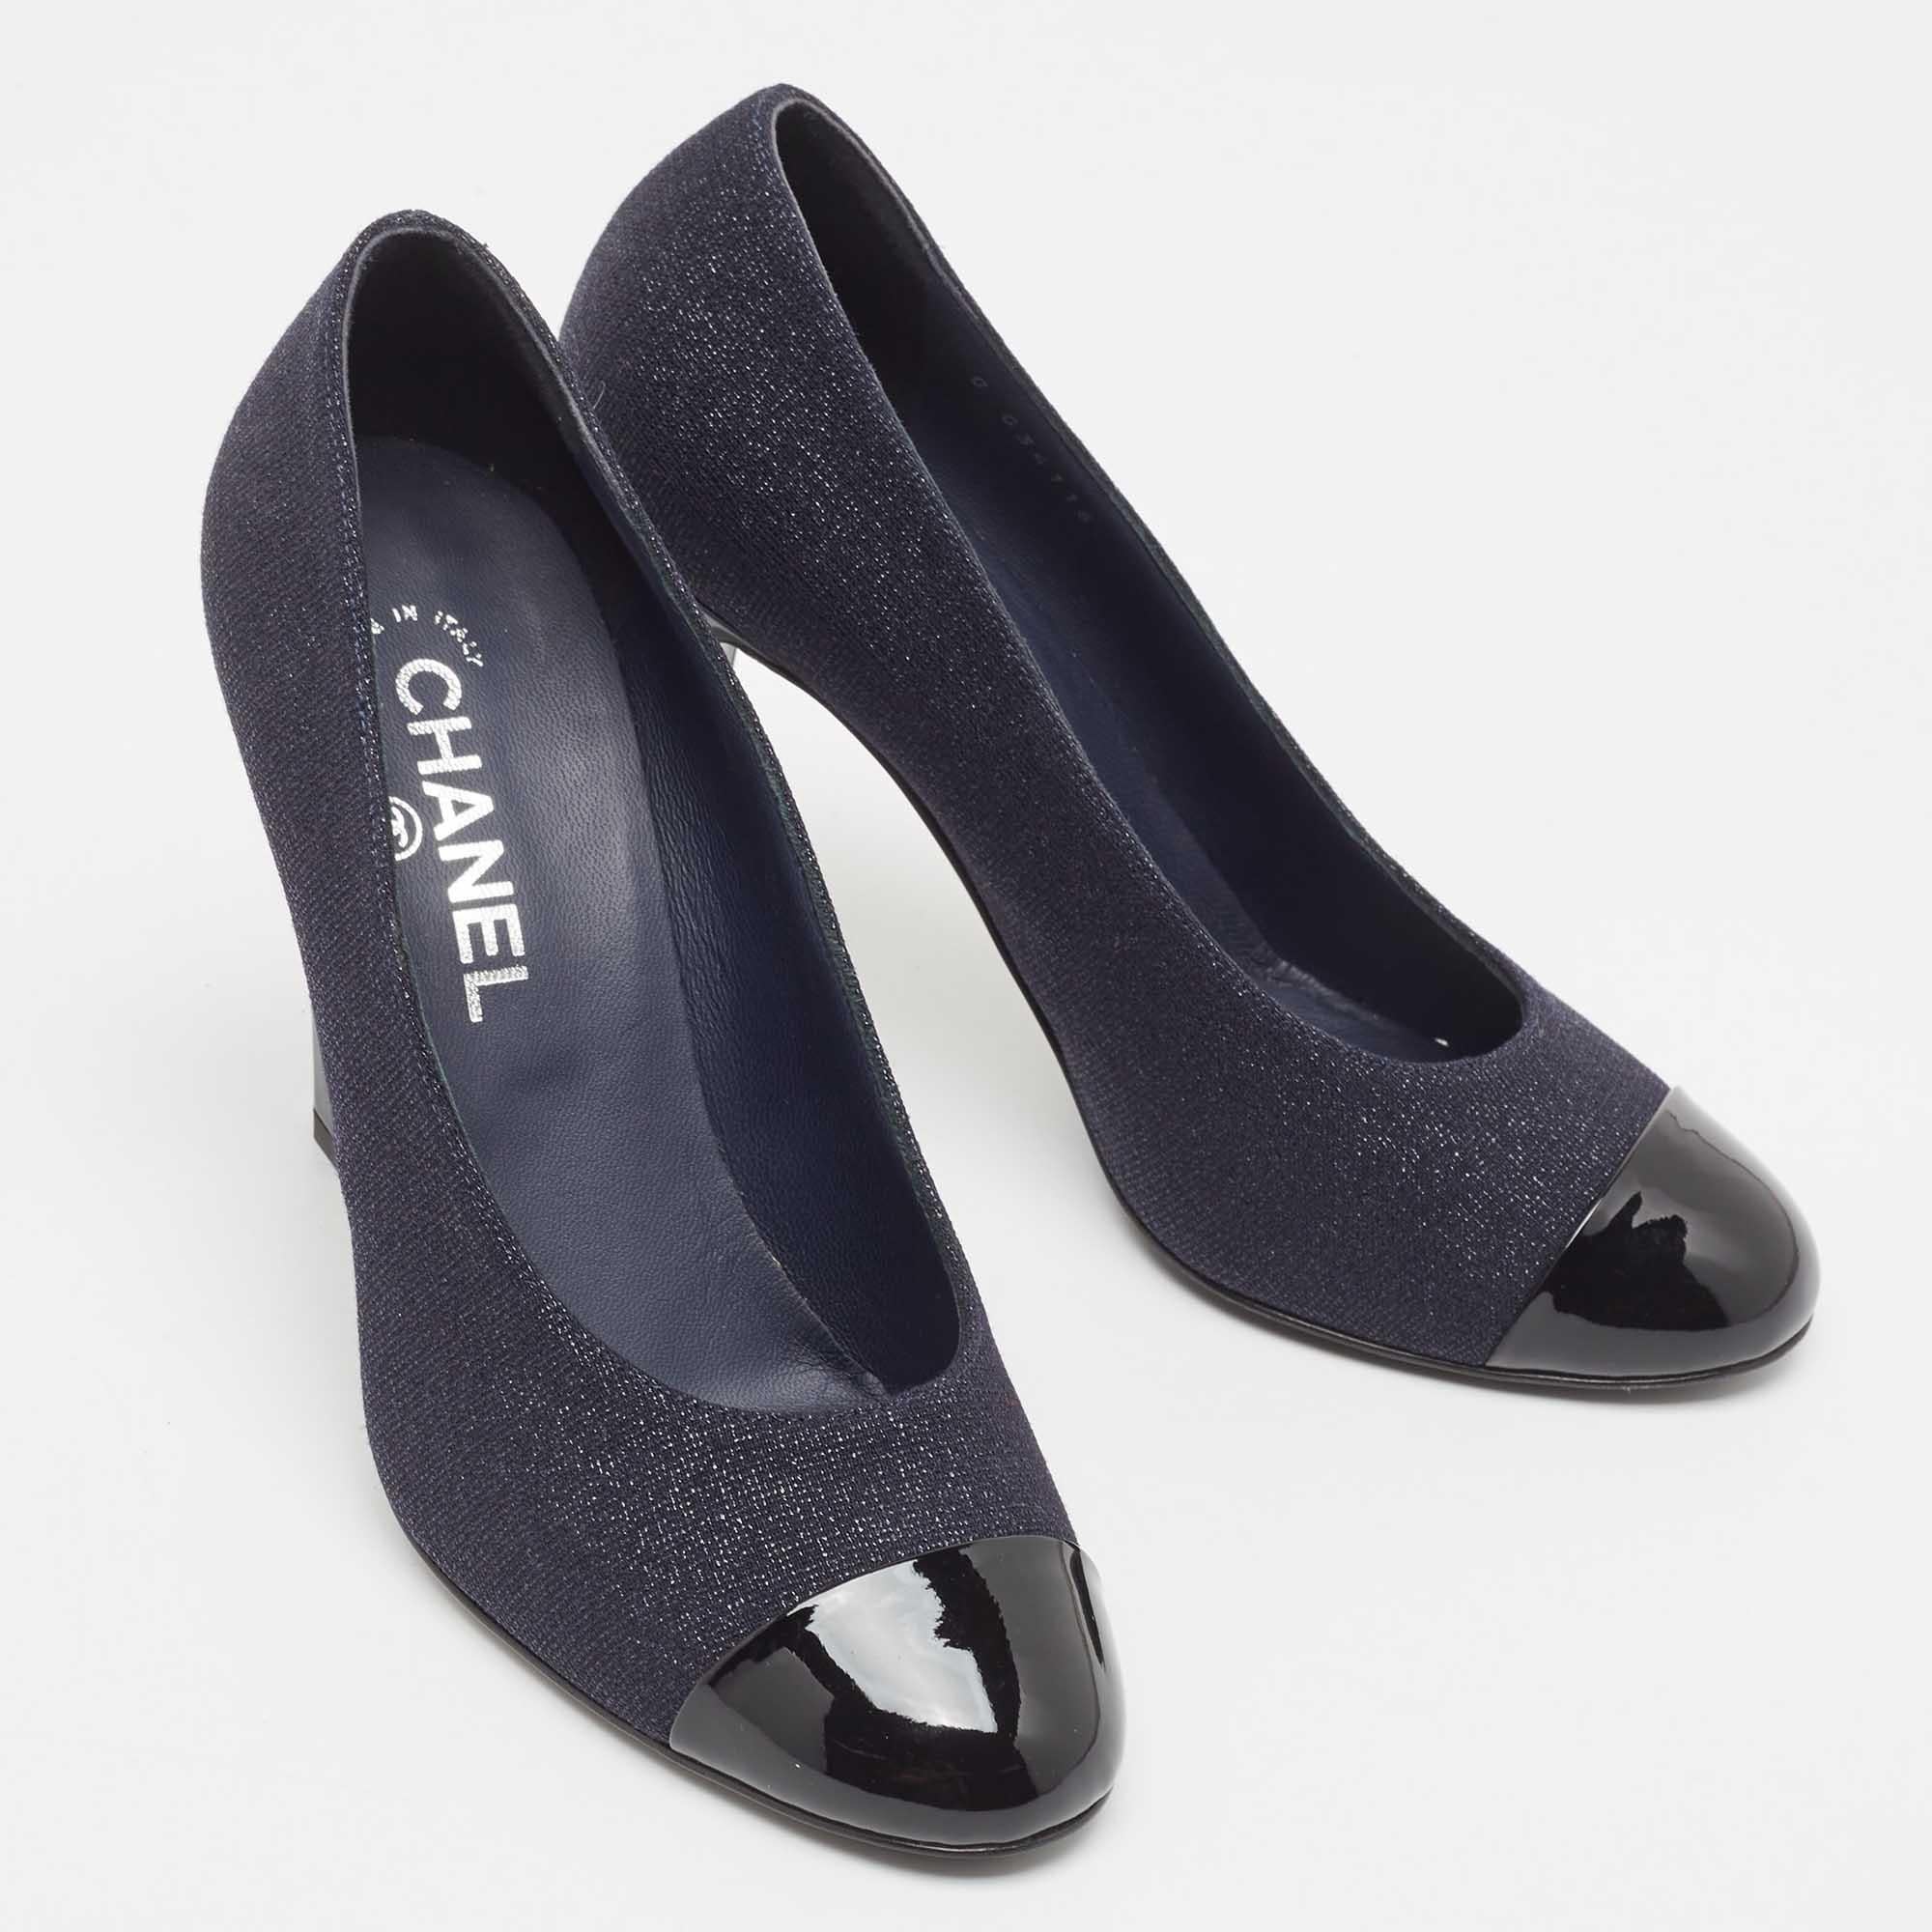 Women's Chanel Navy Blue/Black Lurex Fabric and Patent Leather Cap Toe Pumps Size 39